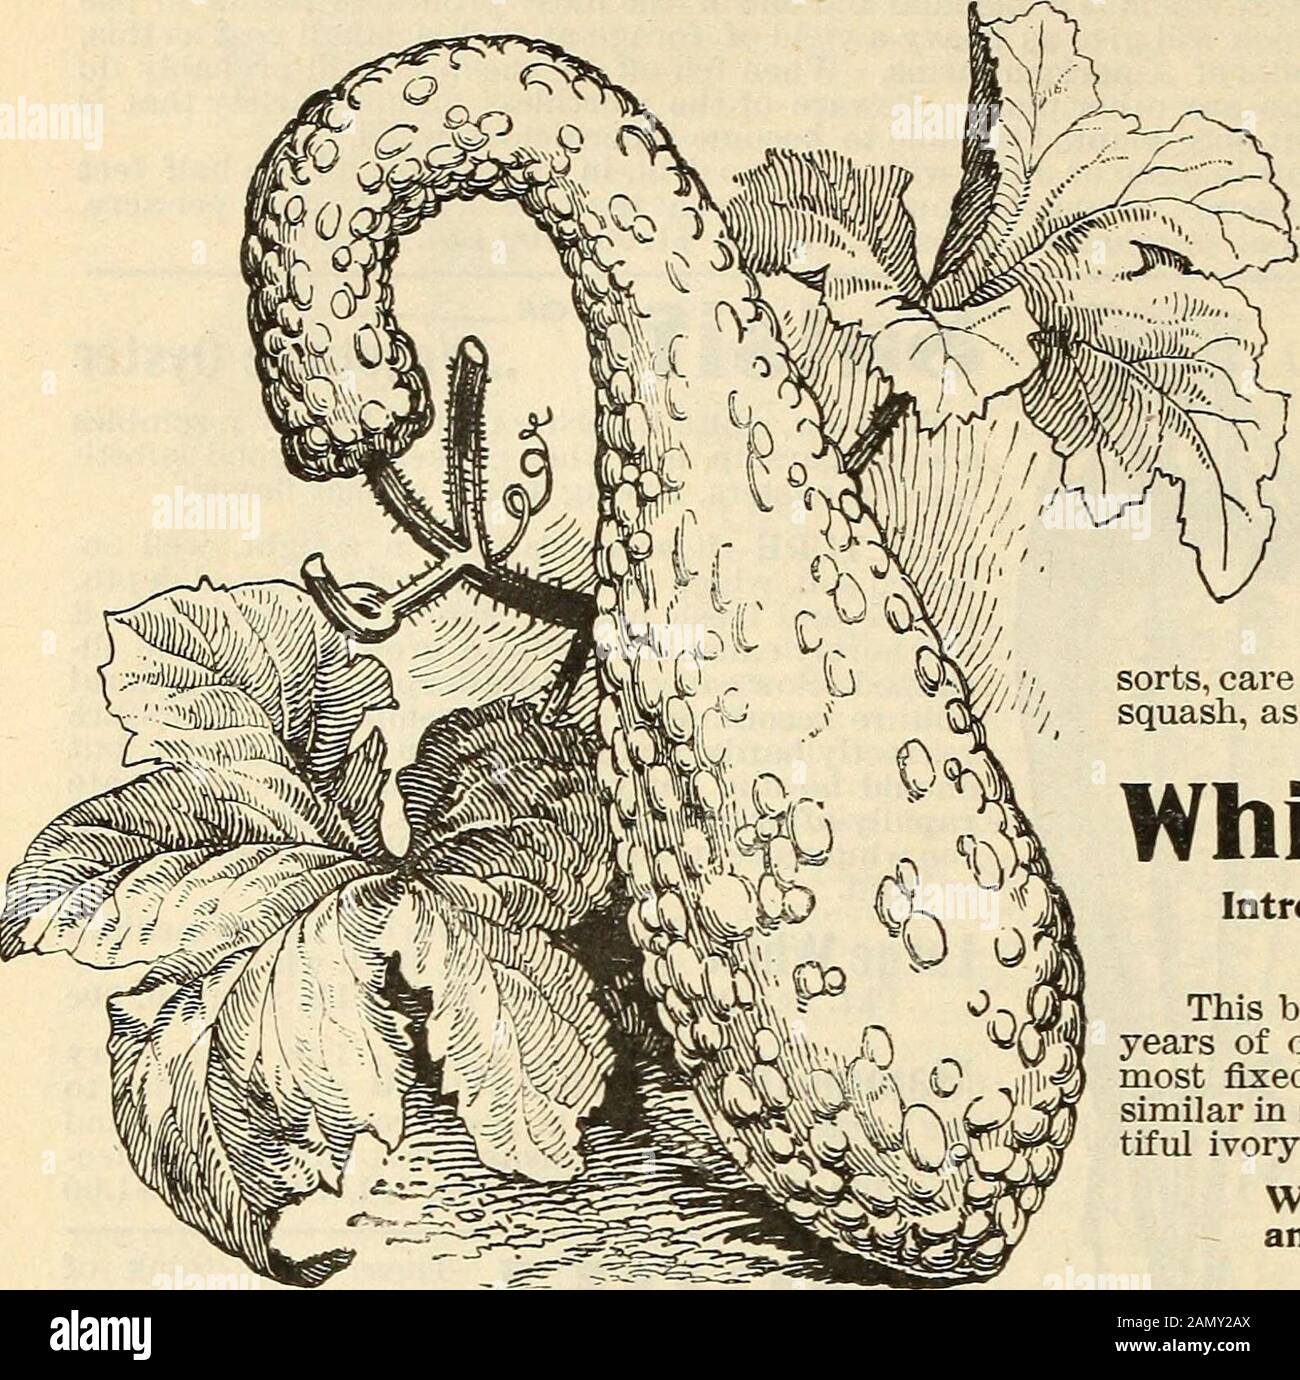 Seed annual, 1899 . se, whether grown for the market or in the private garden. kt. 5c; Oz. 10c; 2 Oz. lOc; amiot fail.b. 45c I tn ^tanHinn ^^^ improved round seeded strain of excellent merit, having all the good qualities of the ordinary sortsLung oldnQing and continuing in condition for use much longer. The leaves are smooth, and very ilark, rich green. Verypopular with market gardeners. •kt. 5c; Oz. 10c; 2 Oz. 10c; HUk little later than the Lb. 45c )und leaved Long standing Prickly thick and welUlavonHl leaves. Has prickly seed. Pkt ;orts but furnish a large quantity of very5c: Oz. 10c: 2 0z Stock Photo